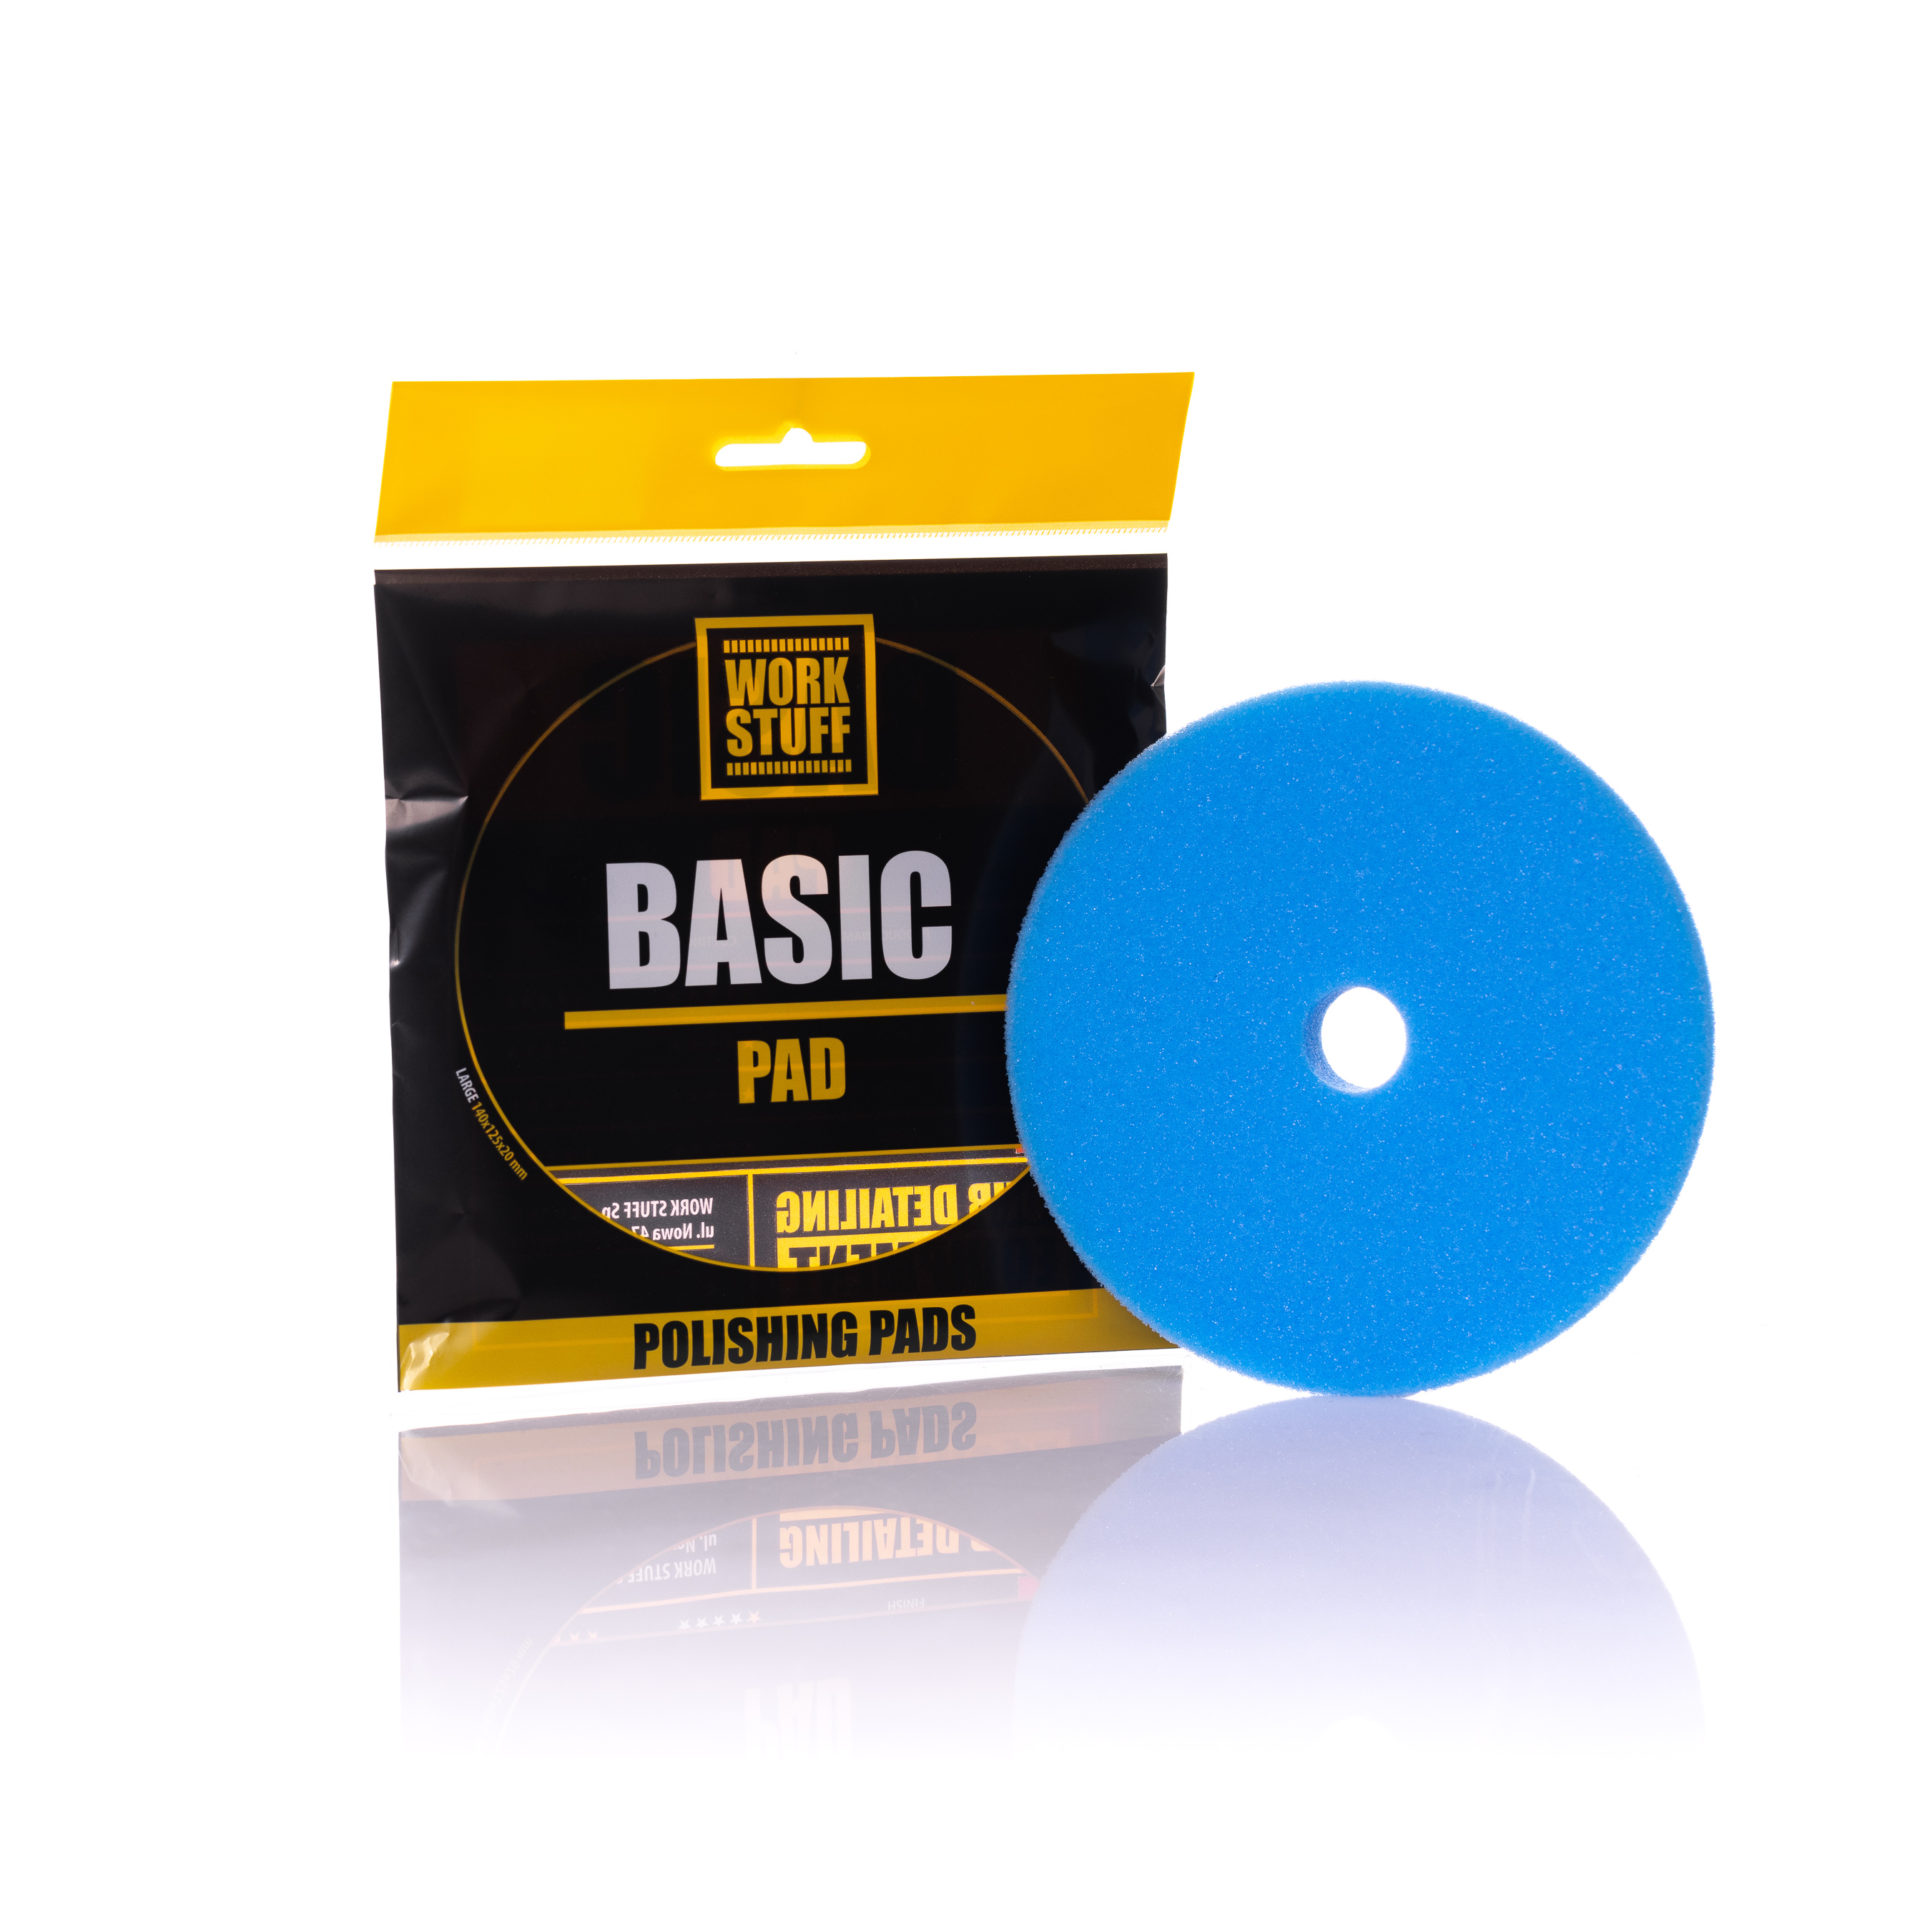 Aggressive cutting pad for removing scratches and restoring car paint